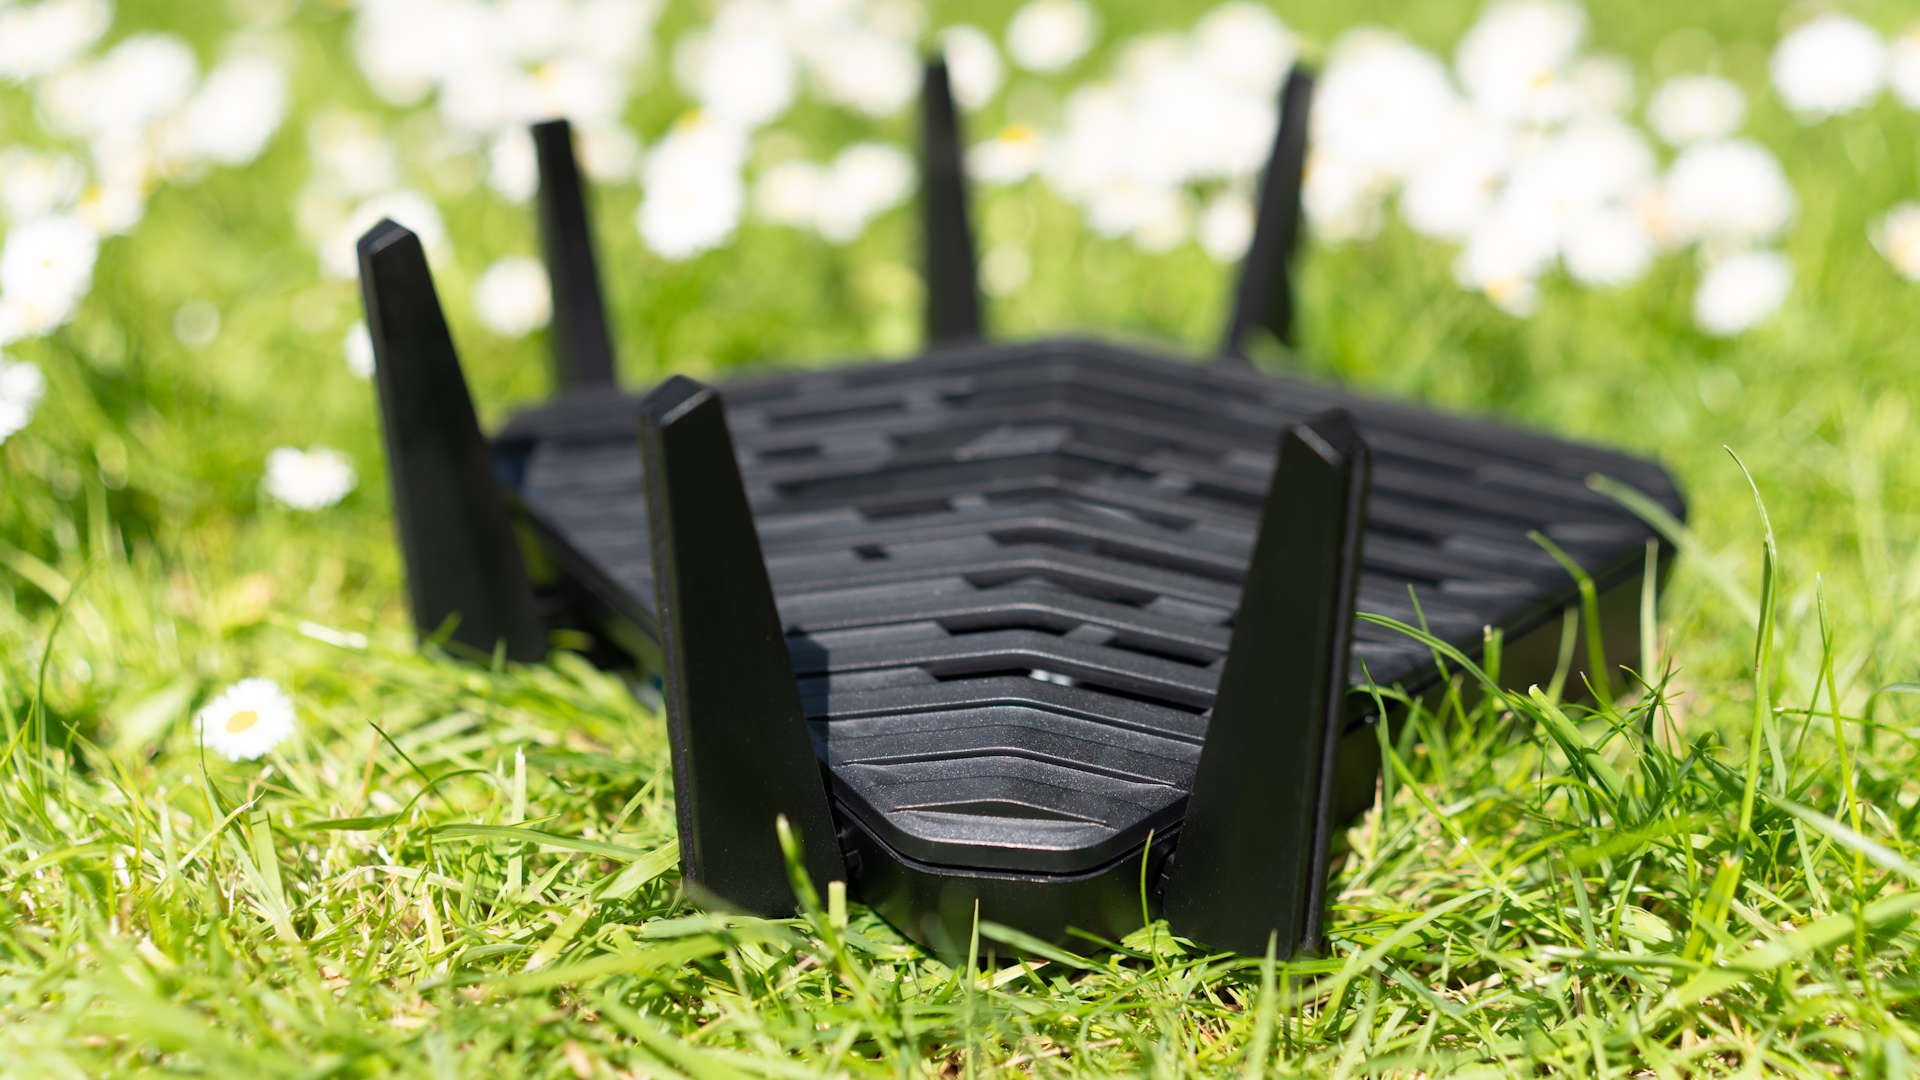 Acer Predator Connect W6 gaming router on grass